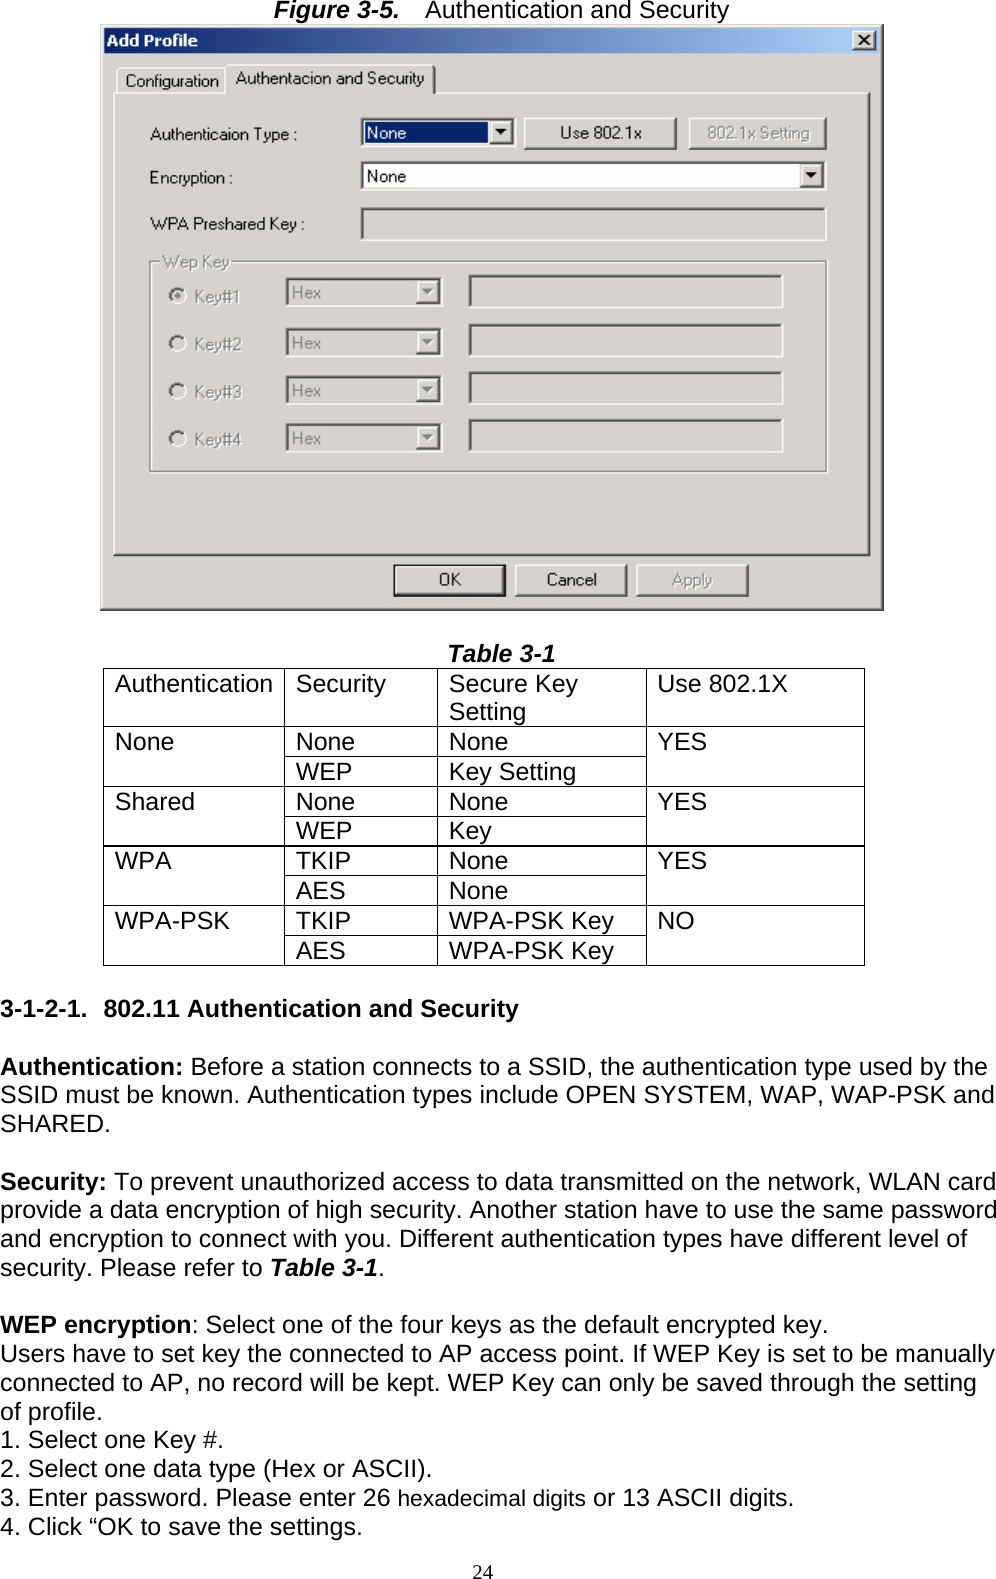 24   Figure 3-5.    Authentication and Security   Table 3-1 Authentication Security  Secure Key Setting  Use 802.1X None None None  WEP Key Setting YES None None Shared  WEP Key   YES TKIP None WPA  AES None  YES TKIP WPA-PSK Key WPA-PSK  AES WPA-PSK Key NO  3-1-2-1.  802.11 Authentication and Security  Authentication: Before a station connects to a SSID, the authentication type used by the SSID must be known. Authentication types include OPEN SYSTEM, WAP, WAP-PSK and SHARED.  Security: To prevent unauthorized access to data transmitted on the network, WLAN card provide a data encryption of high security. Another station have to use the same password and encryption to connect with you. Different authentication types have different level of security. Please refer to Table 3-1.  WEP encryption: Select one of the four keys as the default encrypted key. Users have to set key the connected to AP access point. If WEP Key is set to be manually connected to AP, no record will be kept. WEP Key can only be saved through the setting of profile. 1. Select one Key #. 2. Select one data type (Hex or ASCII). 3. Enter password. Please enter 26 hexadecimal digits or 13 ASCII digits. 4. Click “OK to save the settings. 